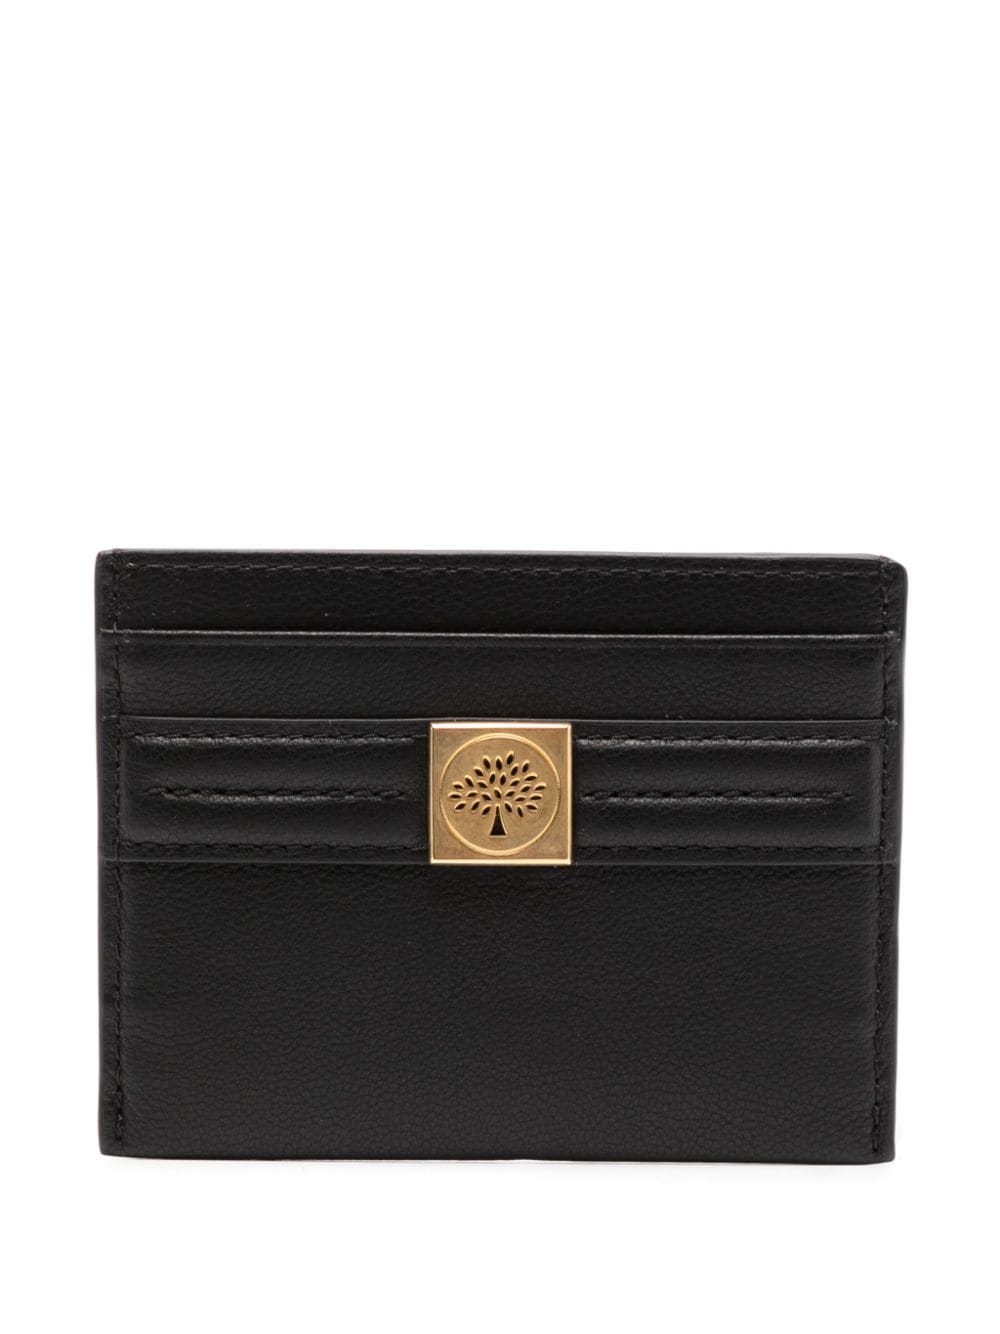 Mulberry Mulberry Tree leather cardholder - Black von Mulberry